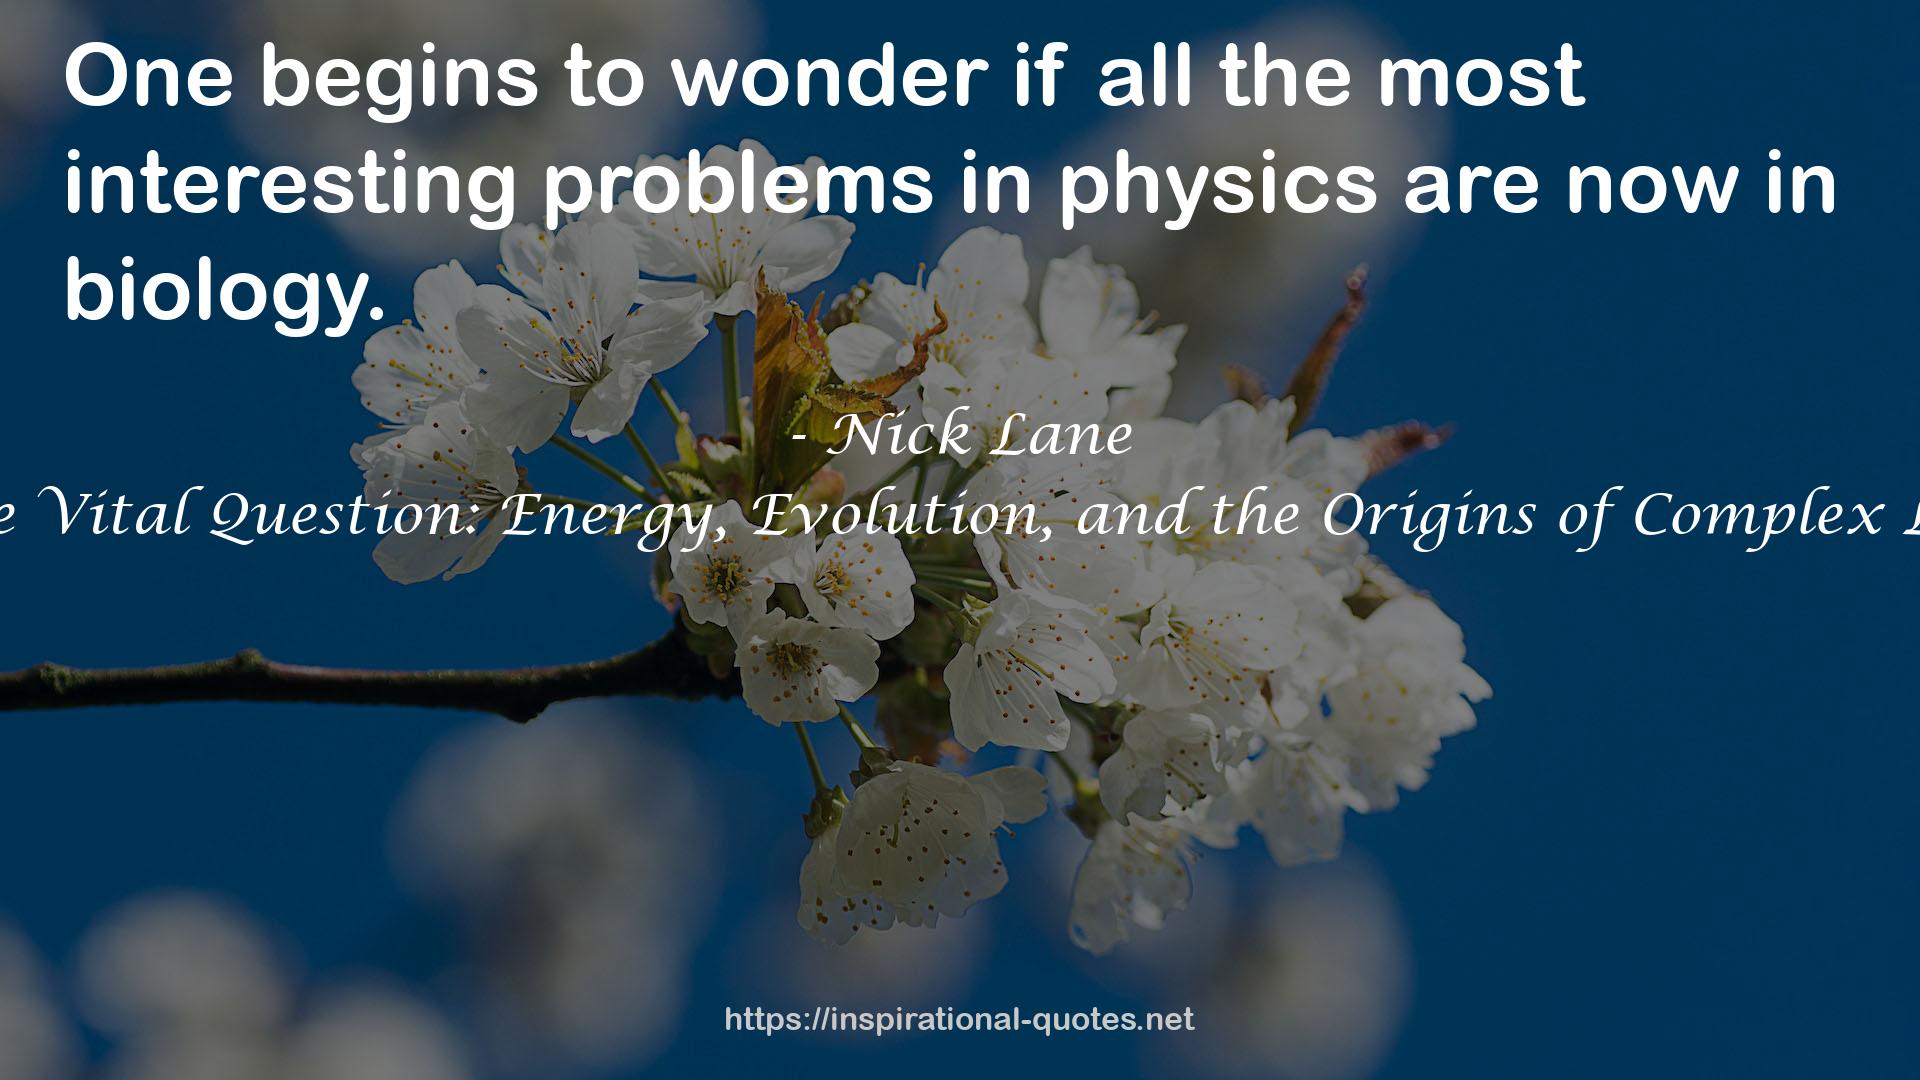 The Vital Question: Energy, Evolution, and the Origins of Complex Life QUOTES